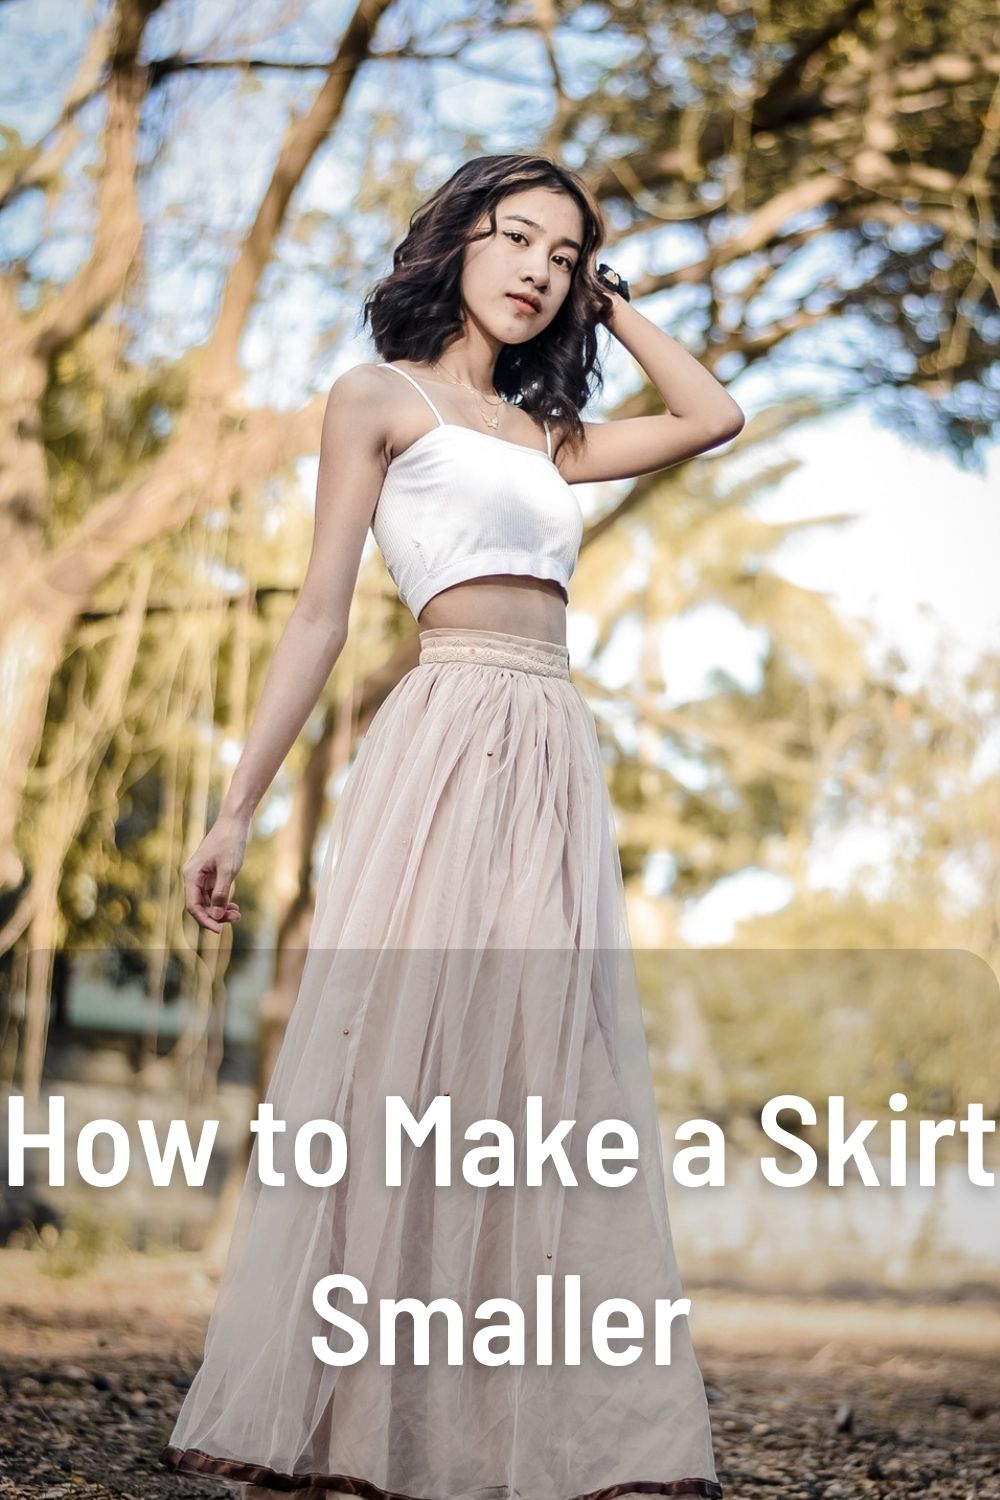 How to Make a Skirt Smaller